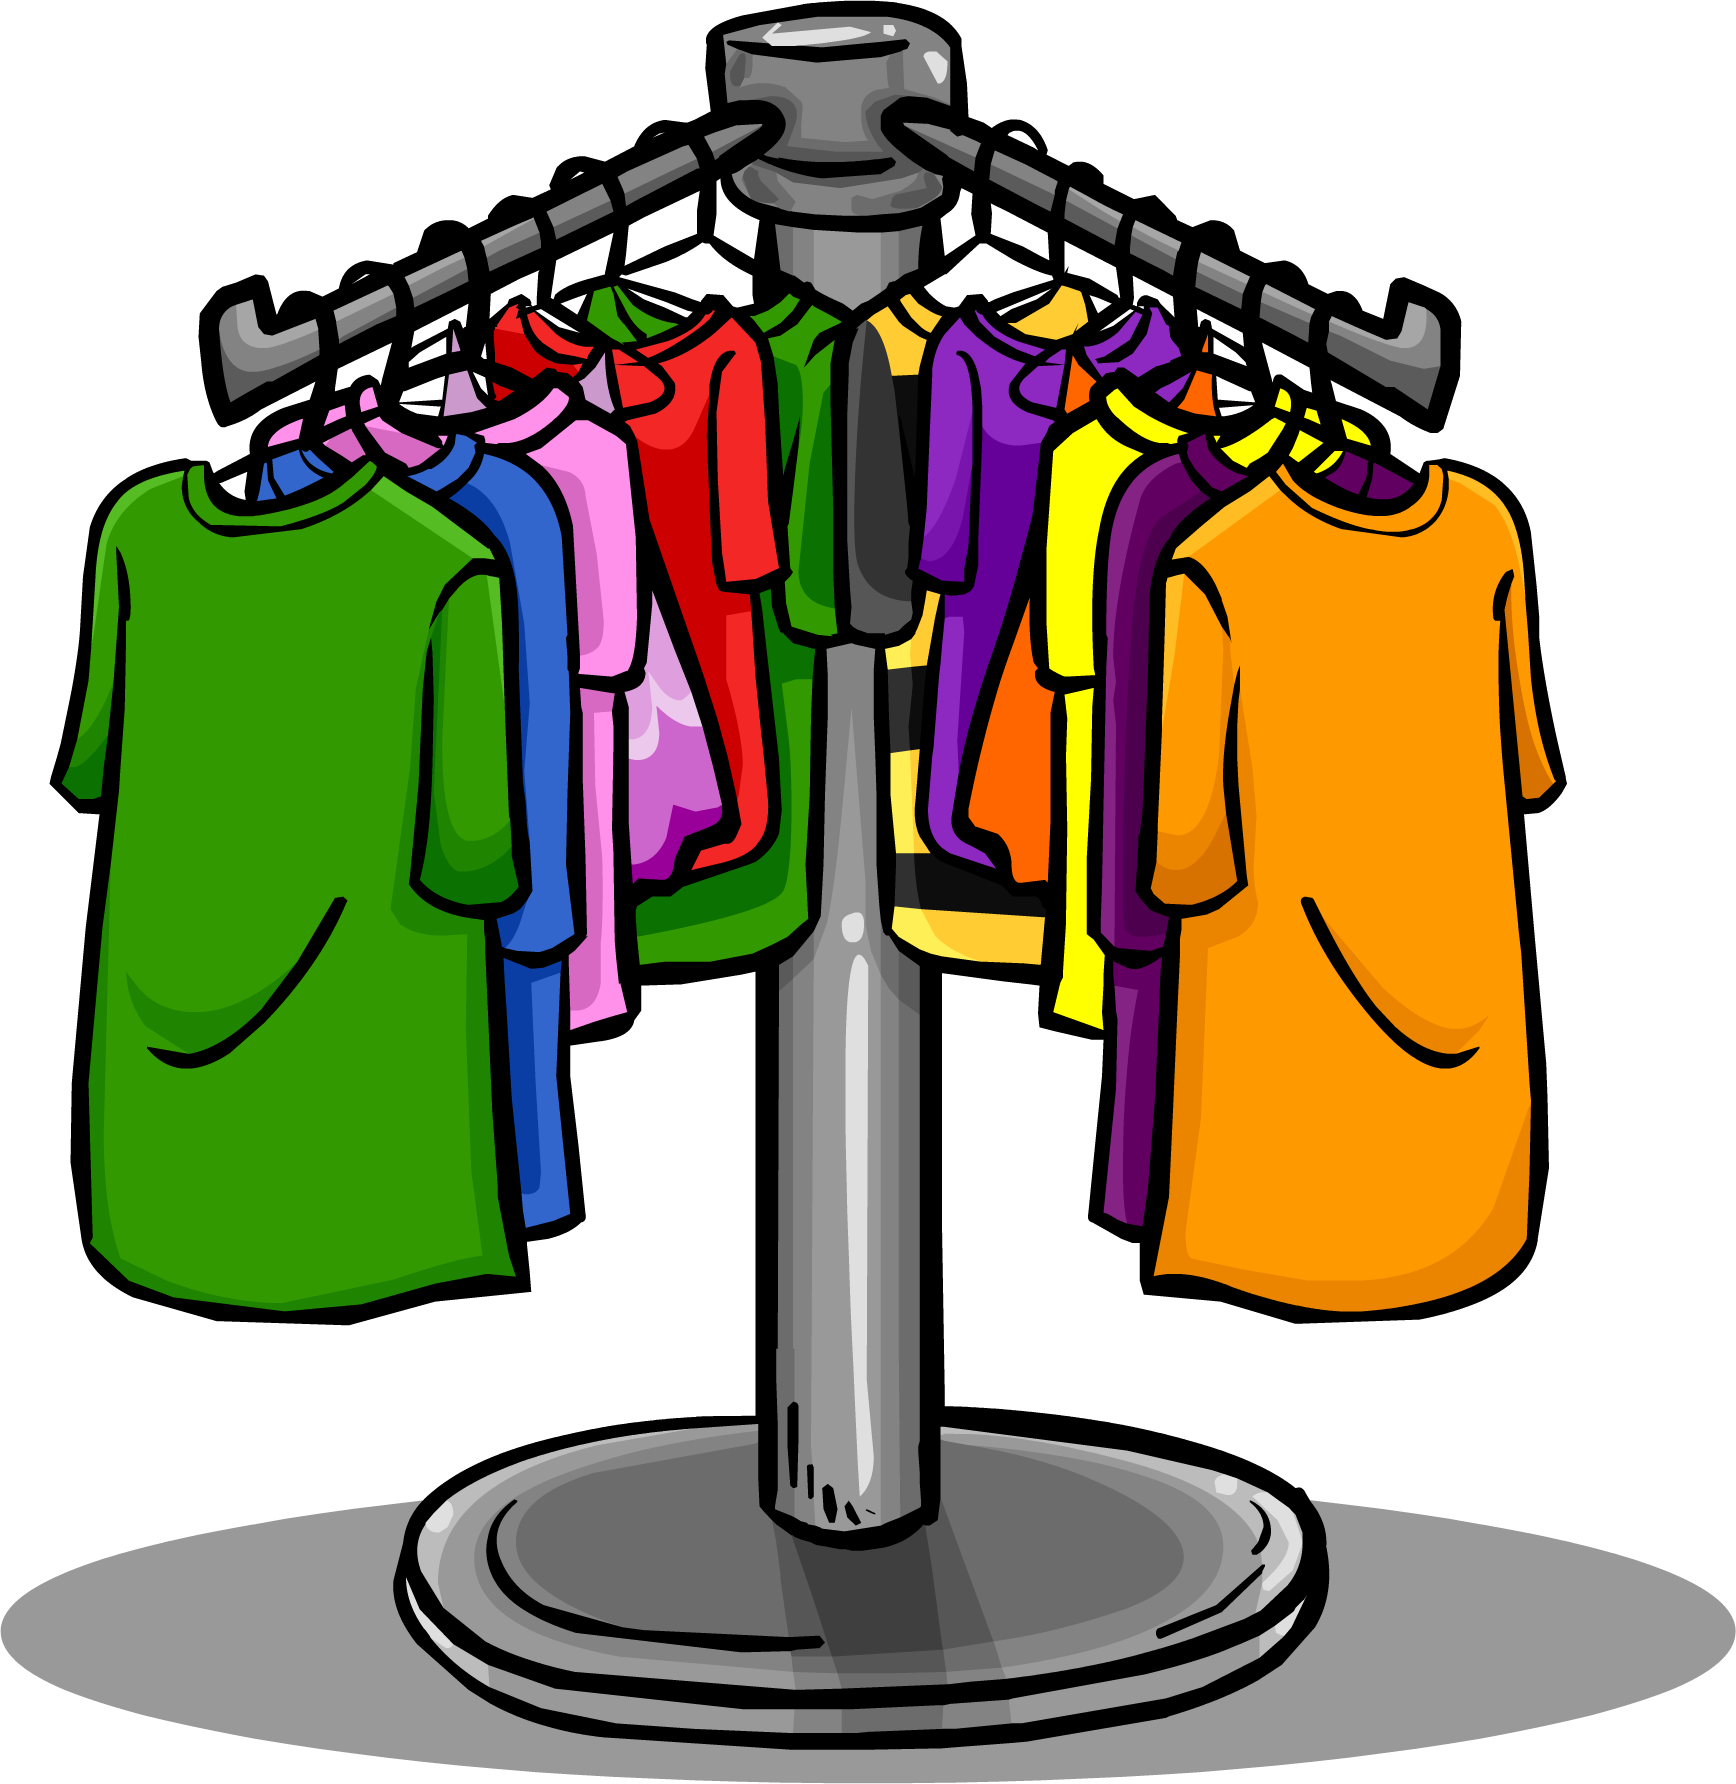 Colorful T Shirtson Clothing Rack PNG